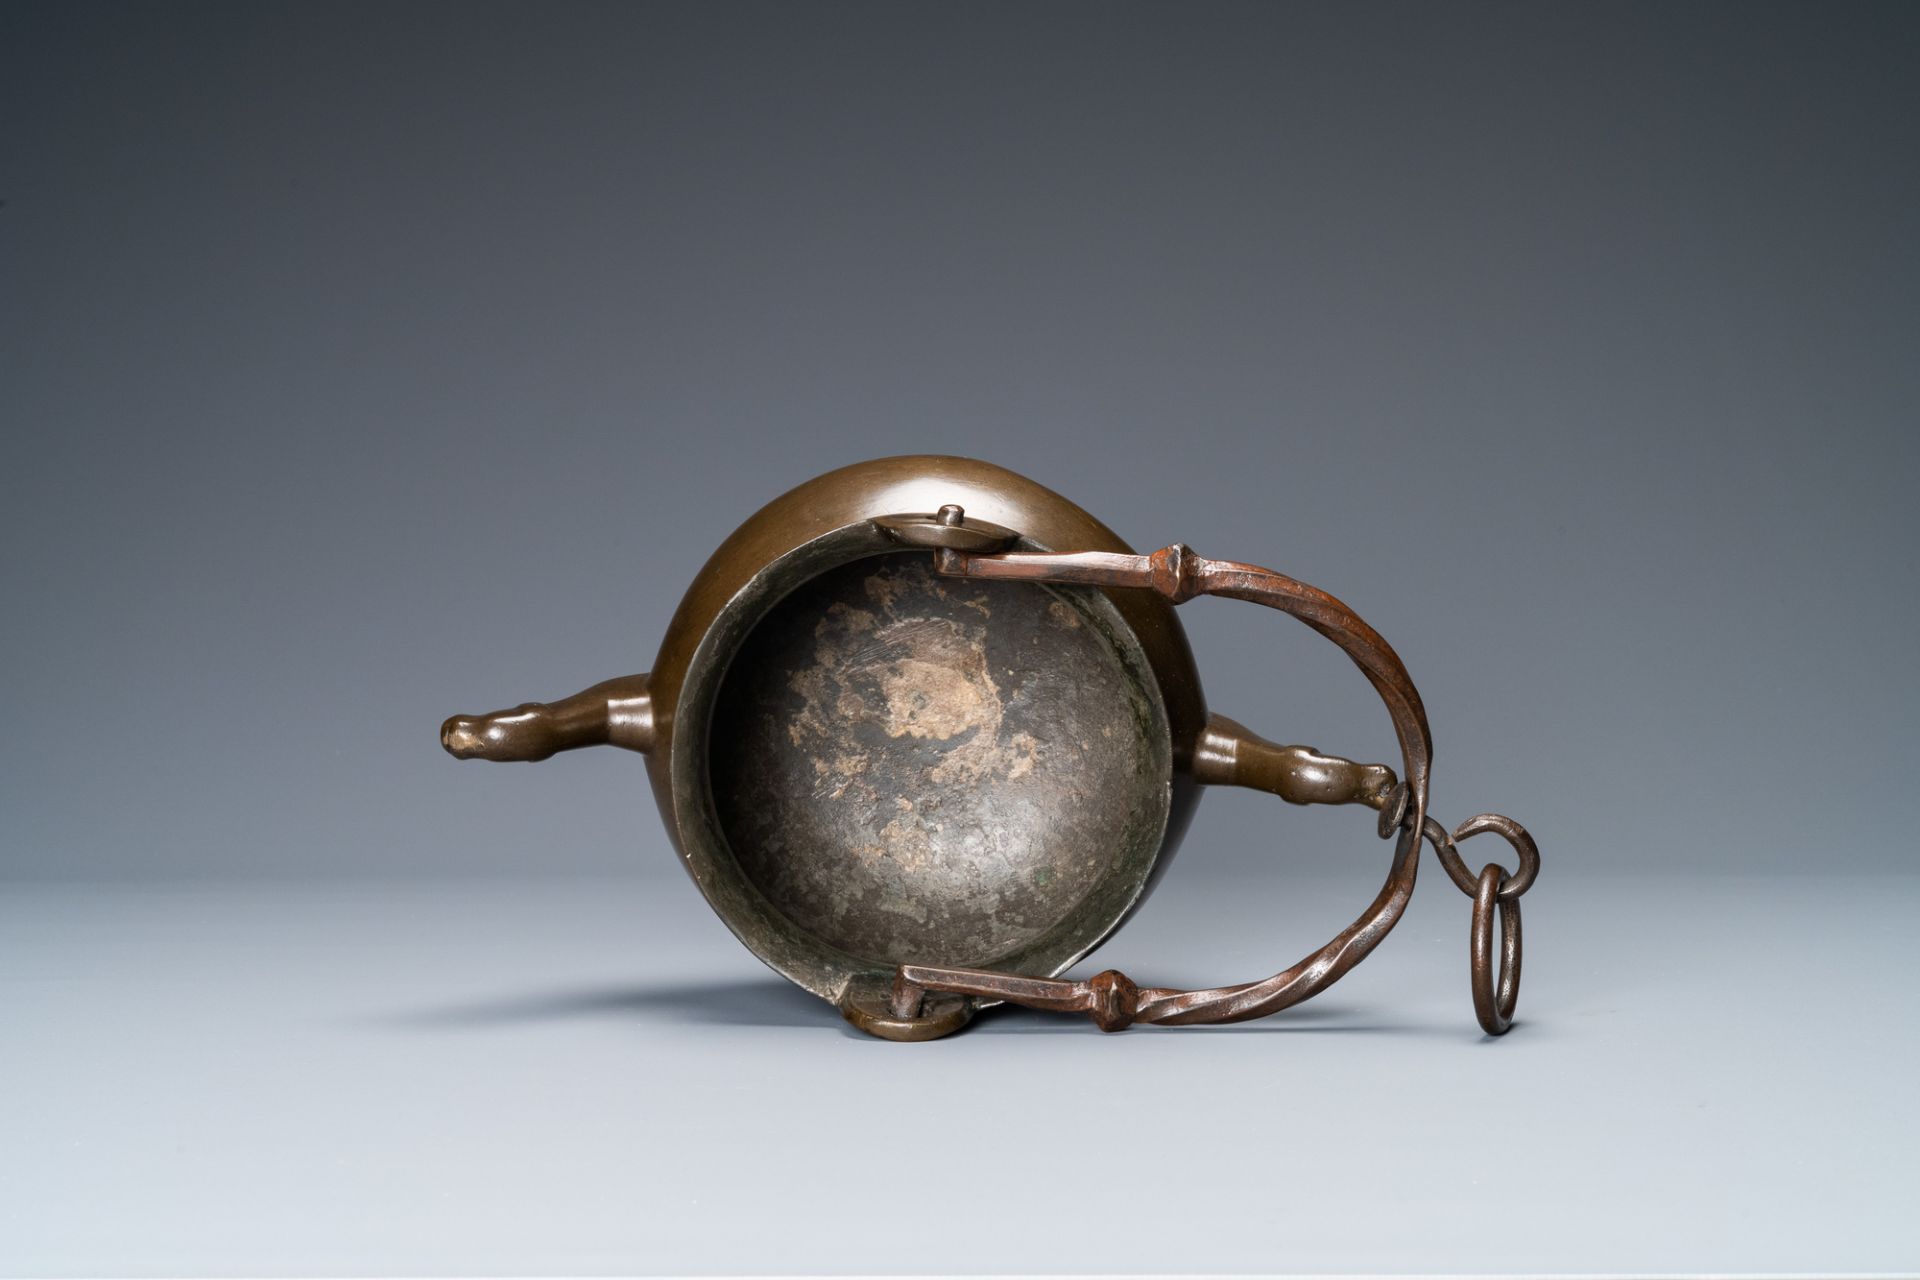 A bronze 'lavabo' water bowl, Flanders, 15th C. - Image 7 of 9